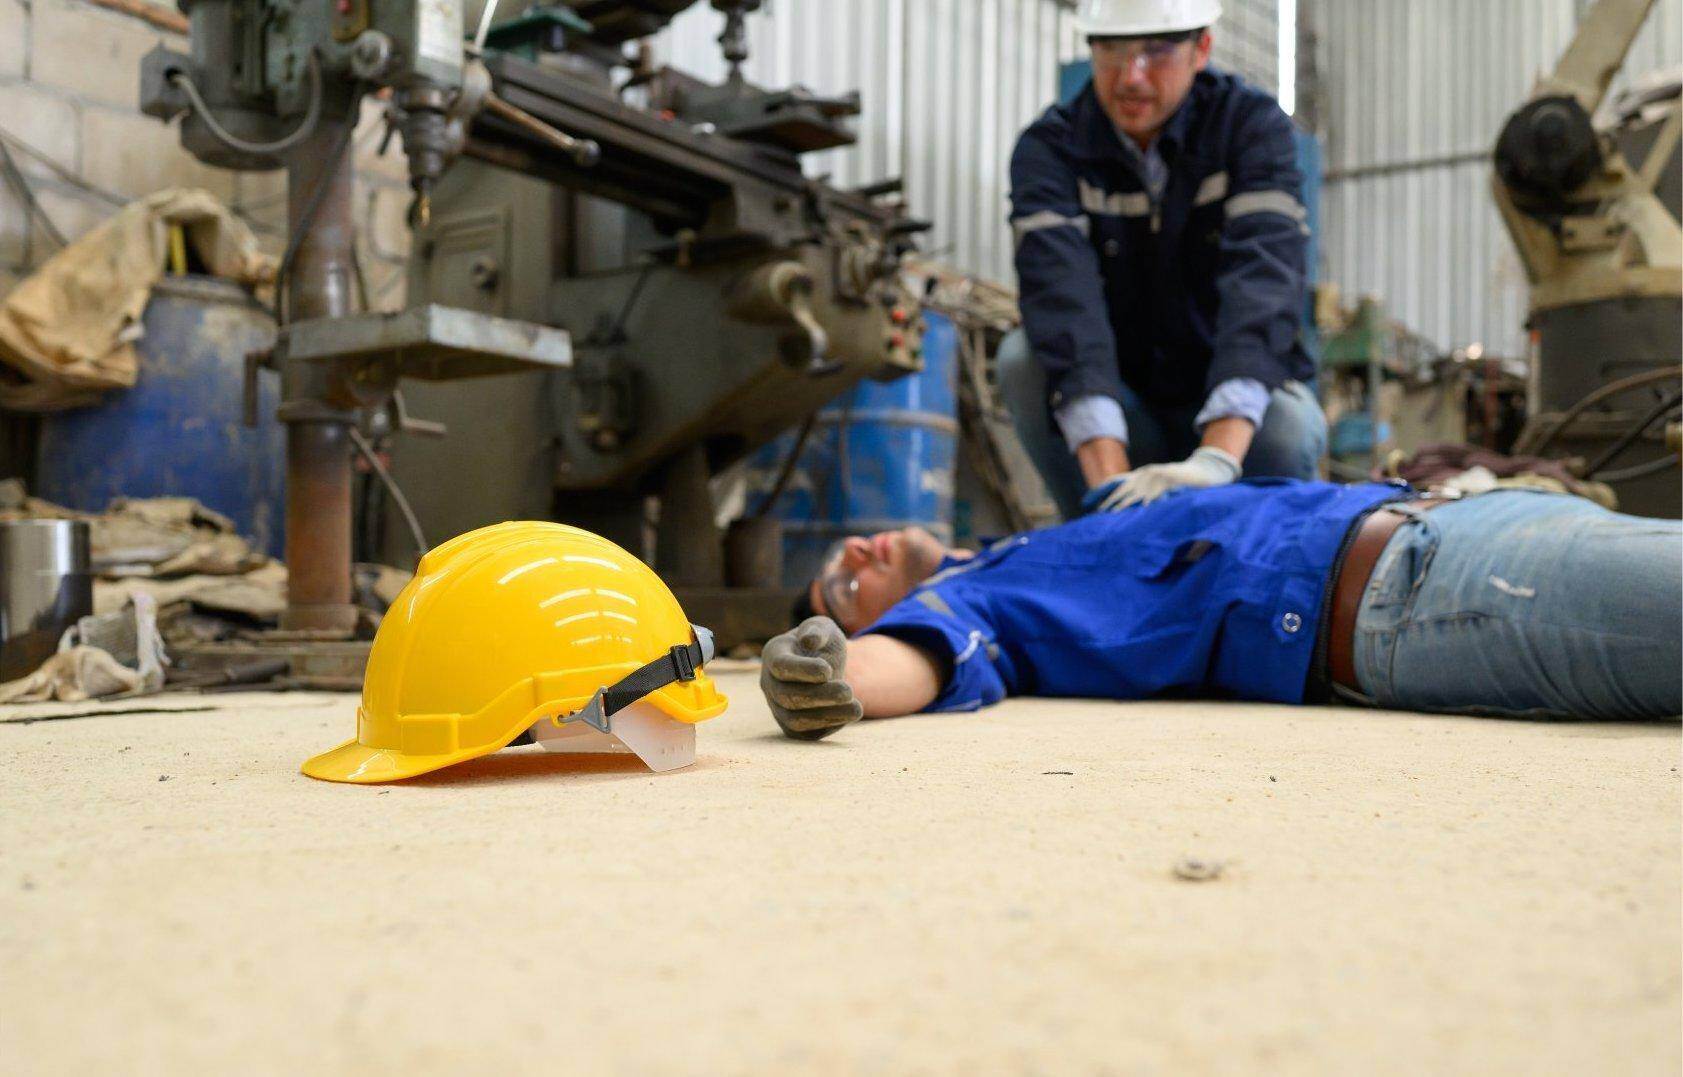 An unconscious man who has been injured on the job who will file for workers compensation in Union City, Georgia